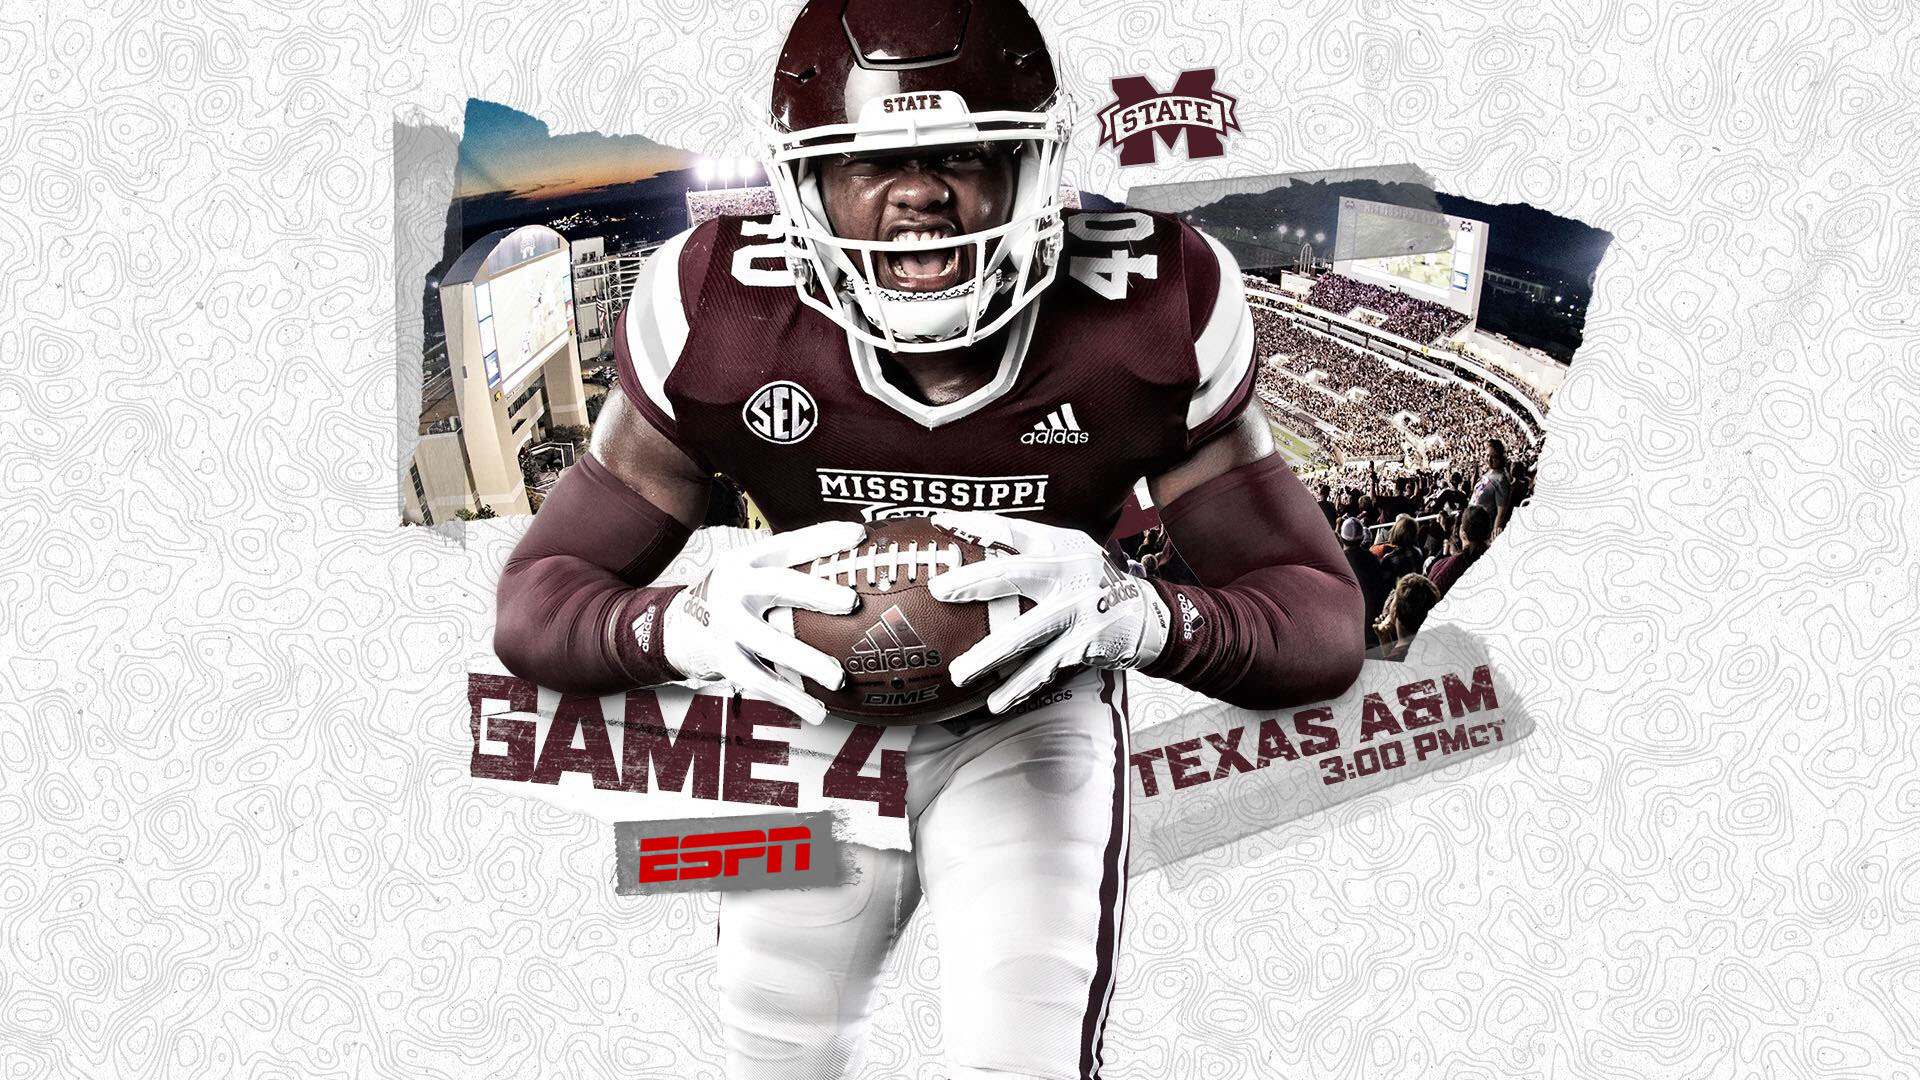 HOME GAME MSU Football vs. Texas A&M  Mississippi State University